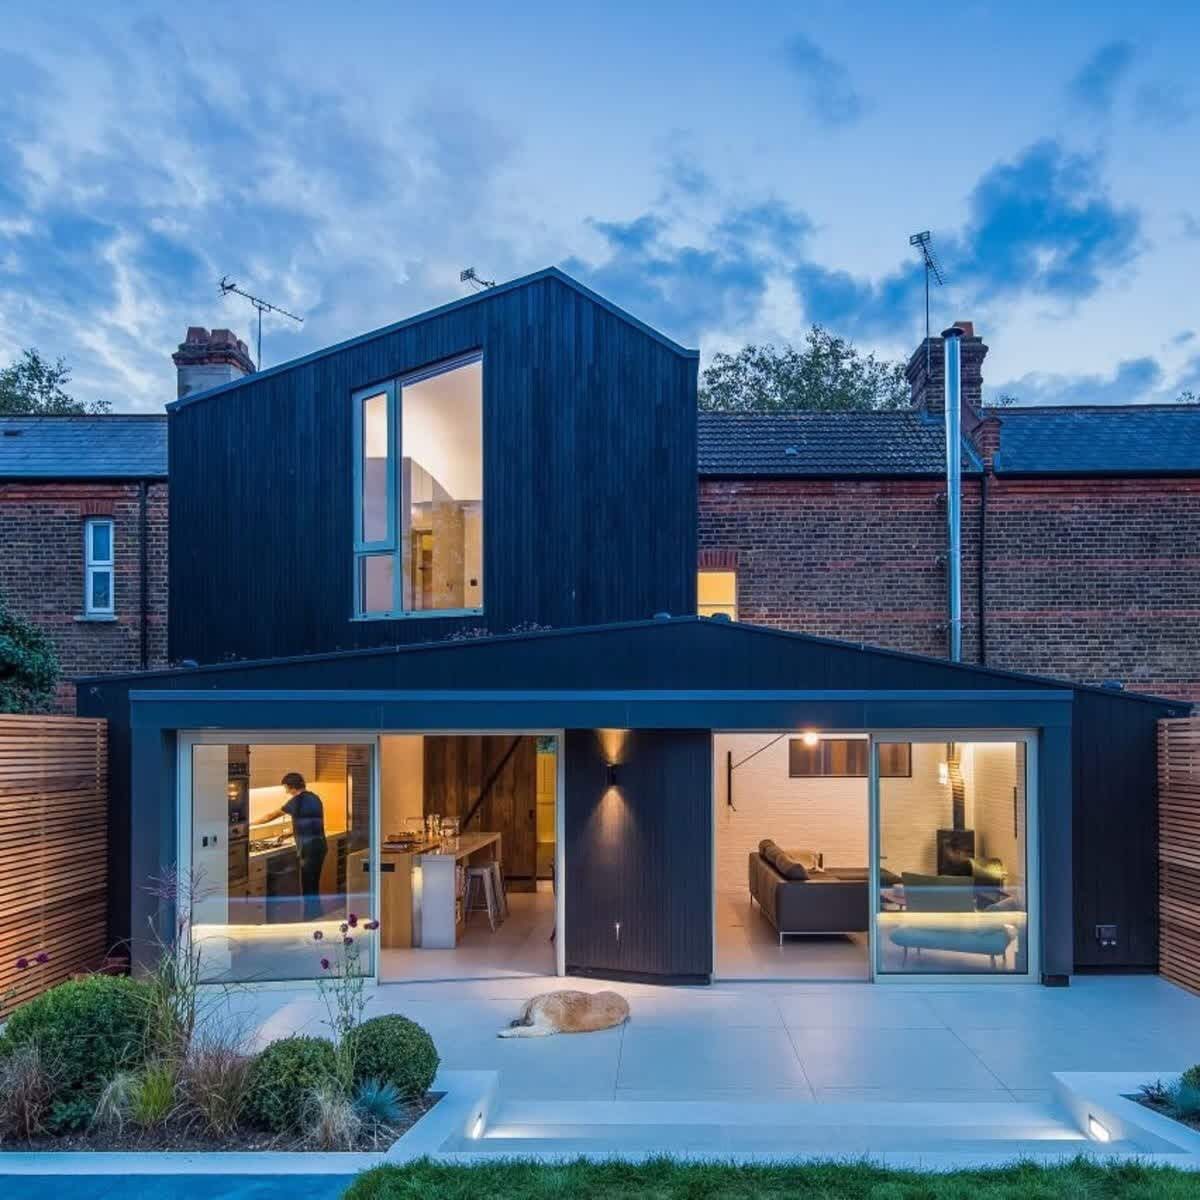 </p> <p>Find your ideal home design pro on designfor-me.com - get matched and see who's interested in your home project. Click image to see more inspiration from our design pros</p> <p>Design by Lewis, architect from Nottingham, East Midlands</p> <p>#architecture #homedesign #modernhomes #homeinspiration #timbercladding #selfbuilds #selfbuildinspiration #selfbuildideas #granddesigns </p> <p>